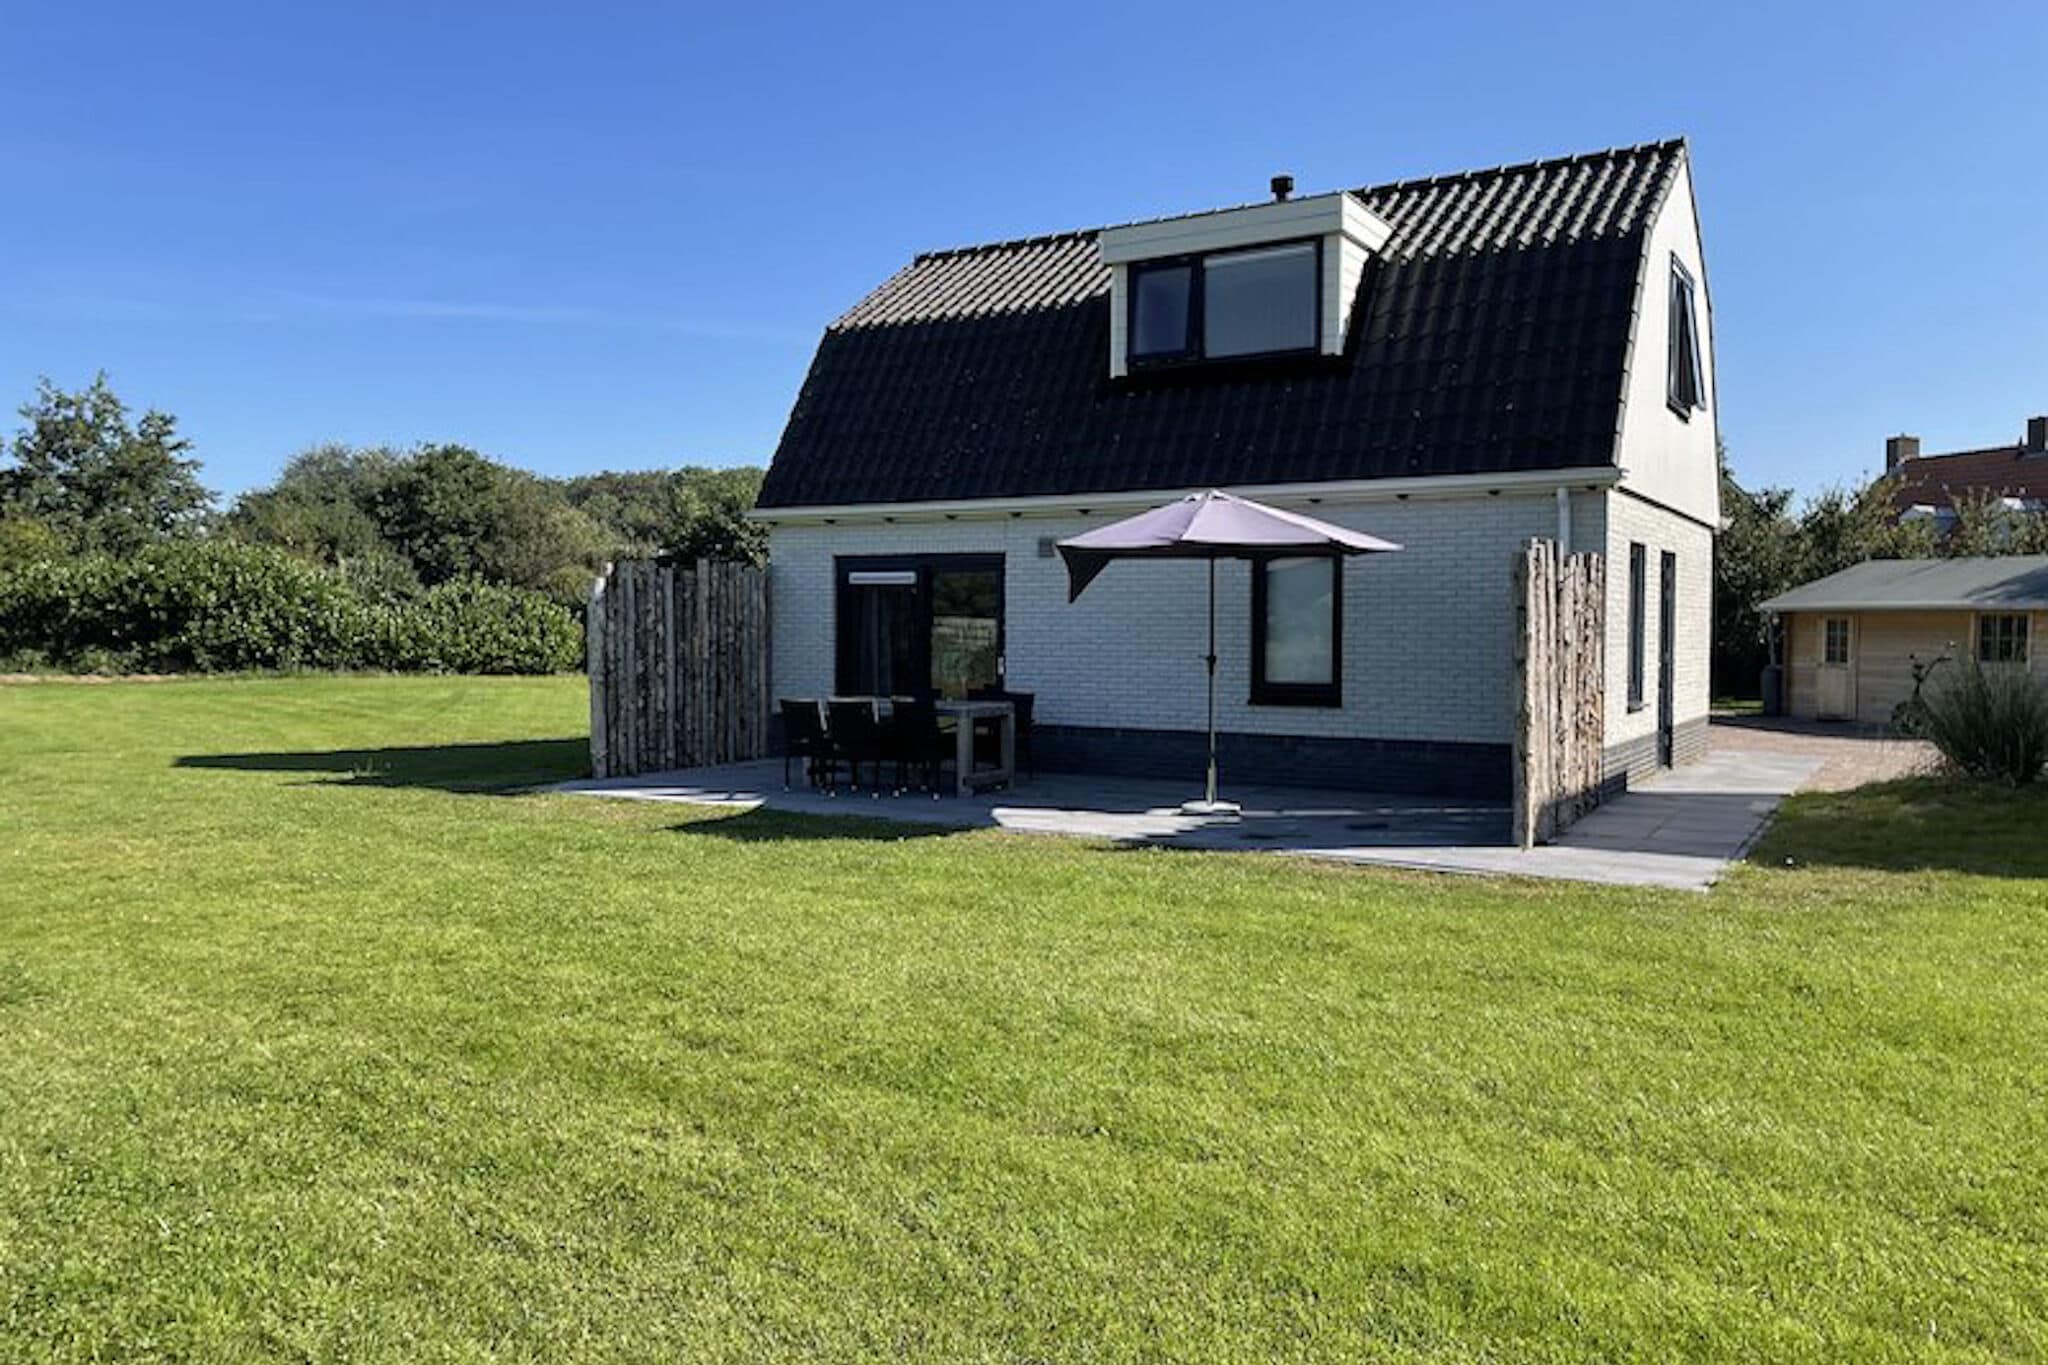 Detached house with nice view located on Texel